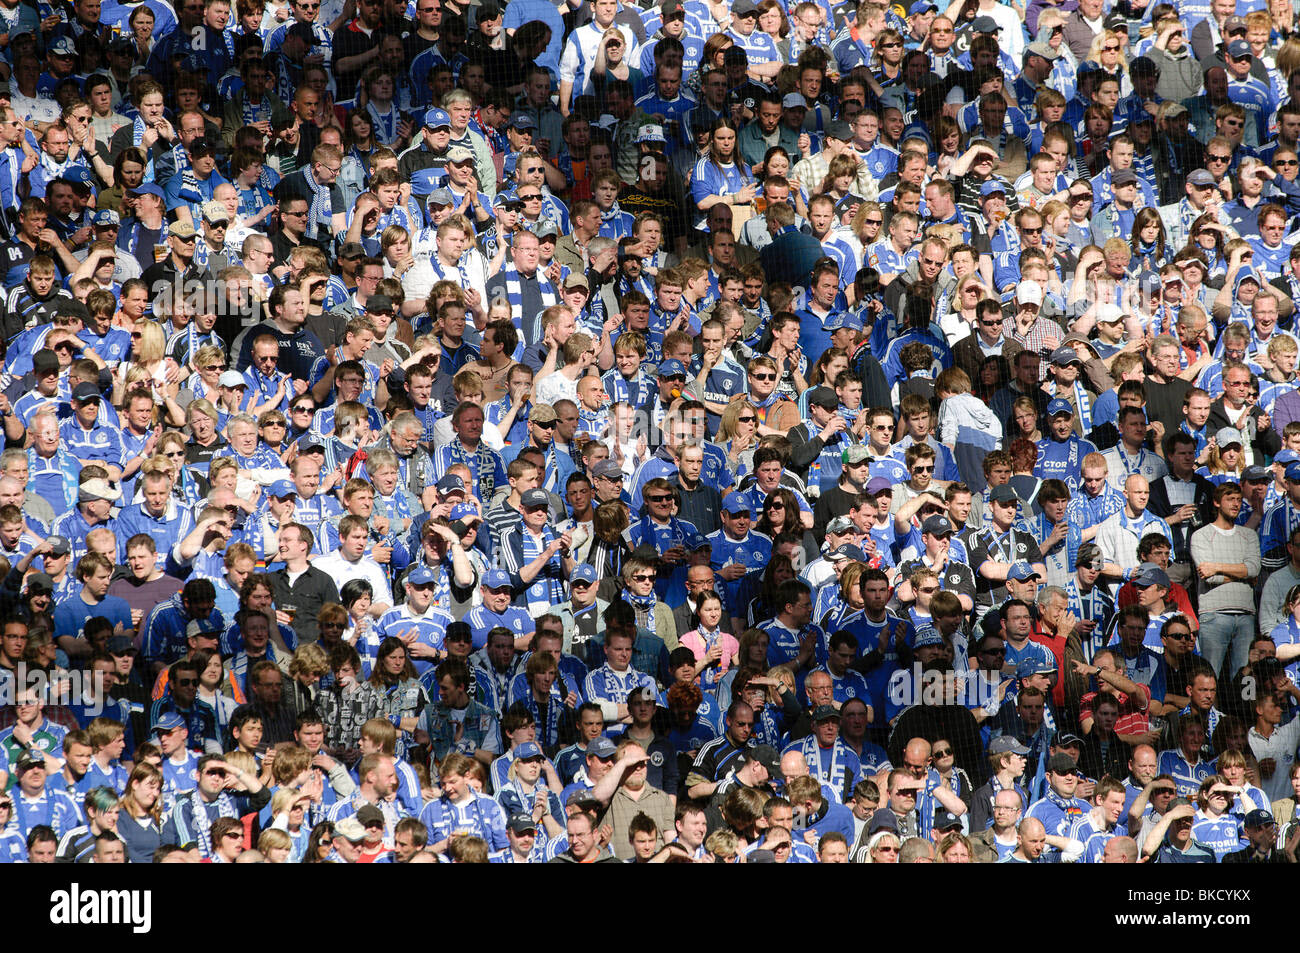 football fans crowd the stands in Schalke Arena, home of german football club Schalke 04 Stock Photo